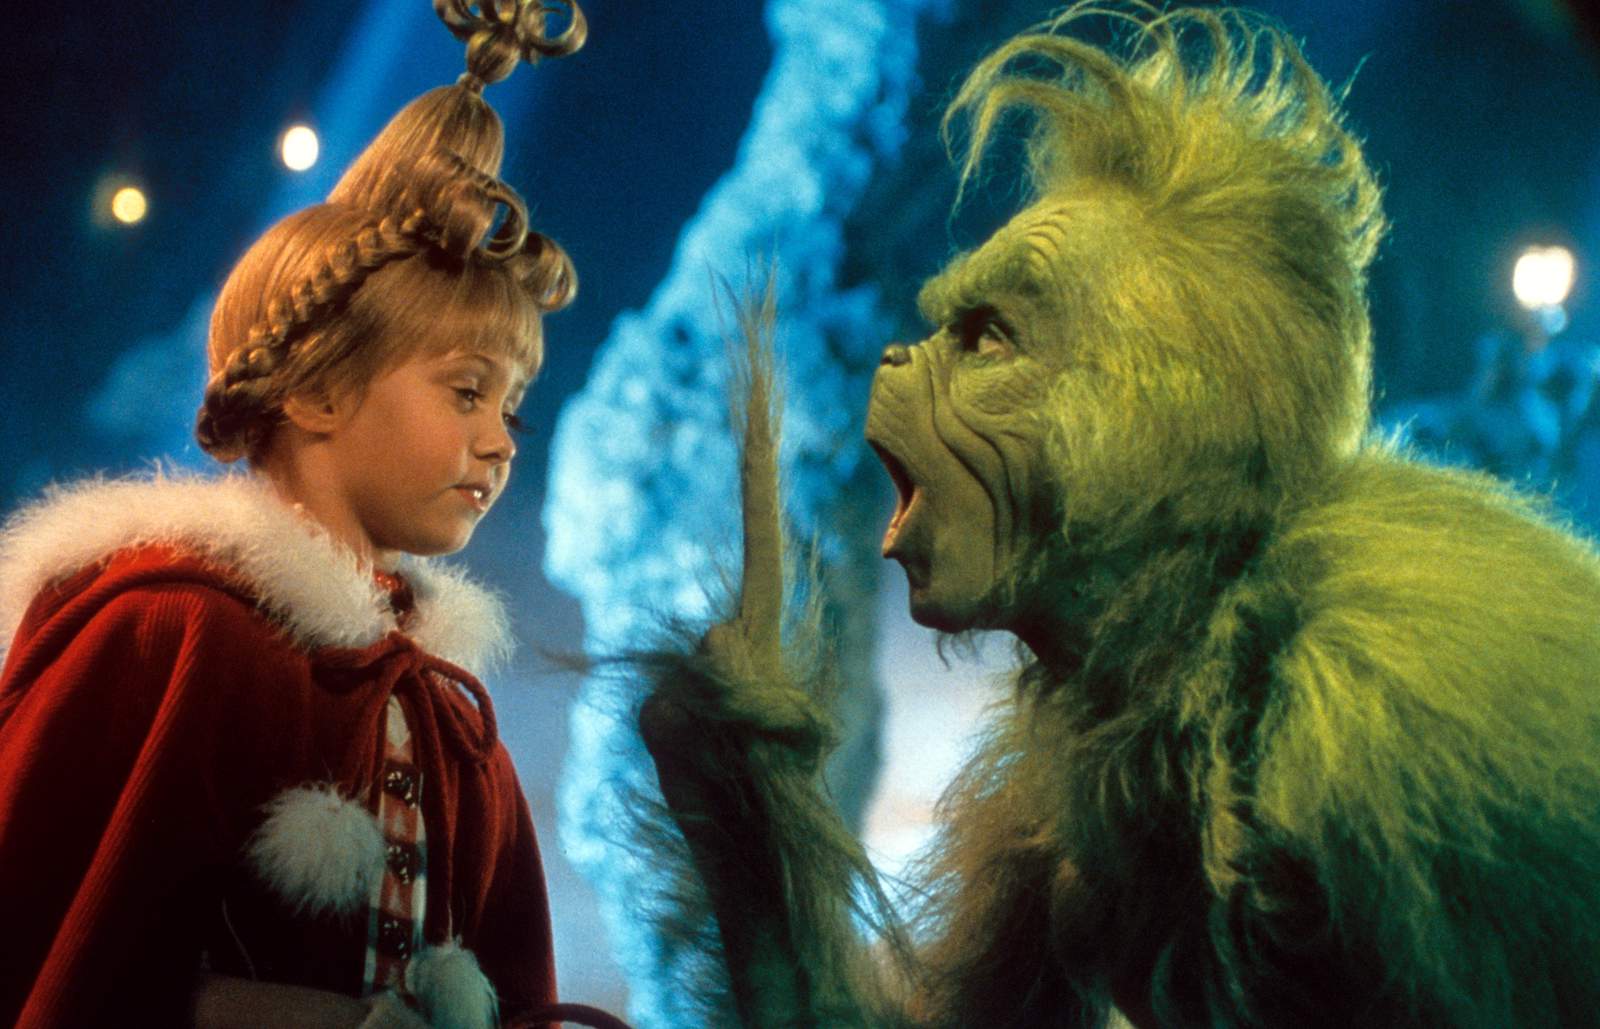 The ultimate guide for watching Christmas movies this month